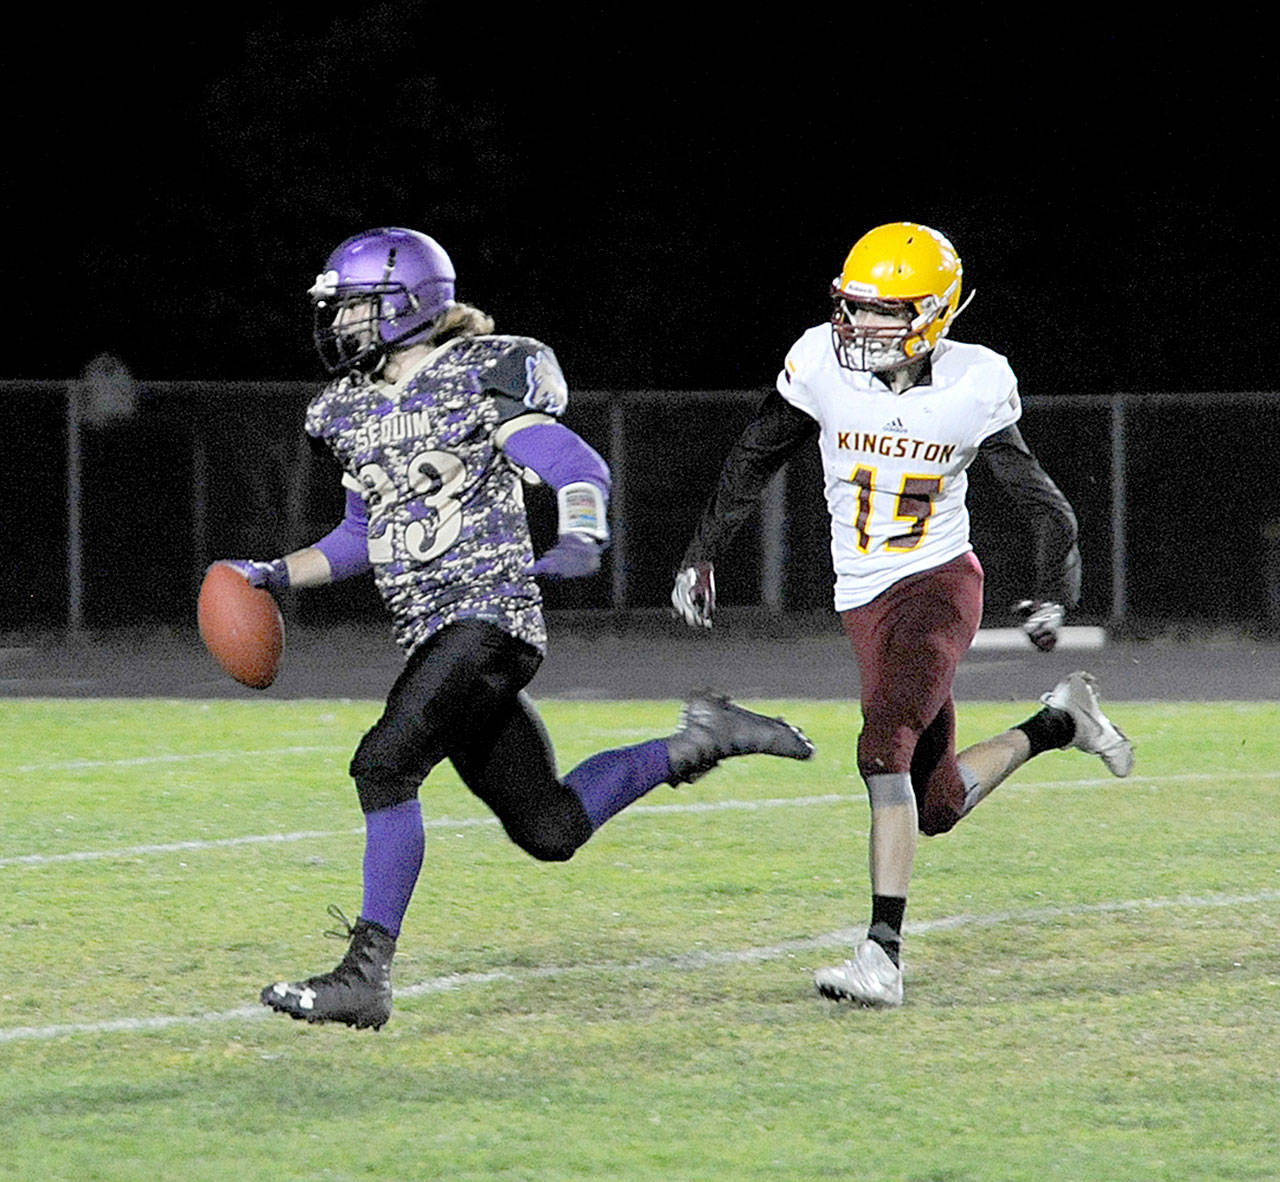 Sequim’s Gavin Velarde runs away from Kingston defender James Dillow for a 65-yard touchdown. It was one of five Velarde touchdowns on the night in Sequim’s 48-6 win. (By Michael Dashiell/Olympic Peninsula News Group)